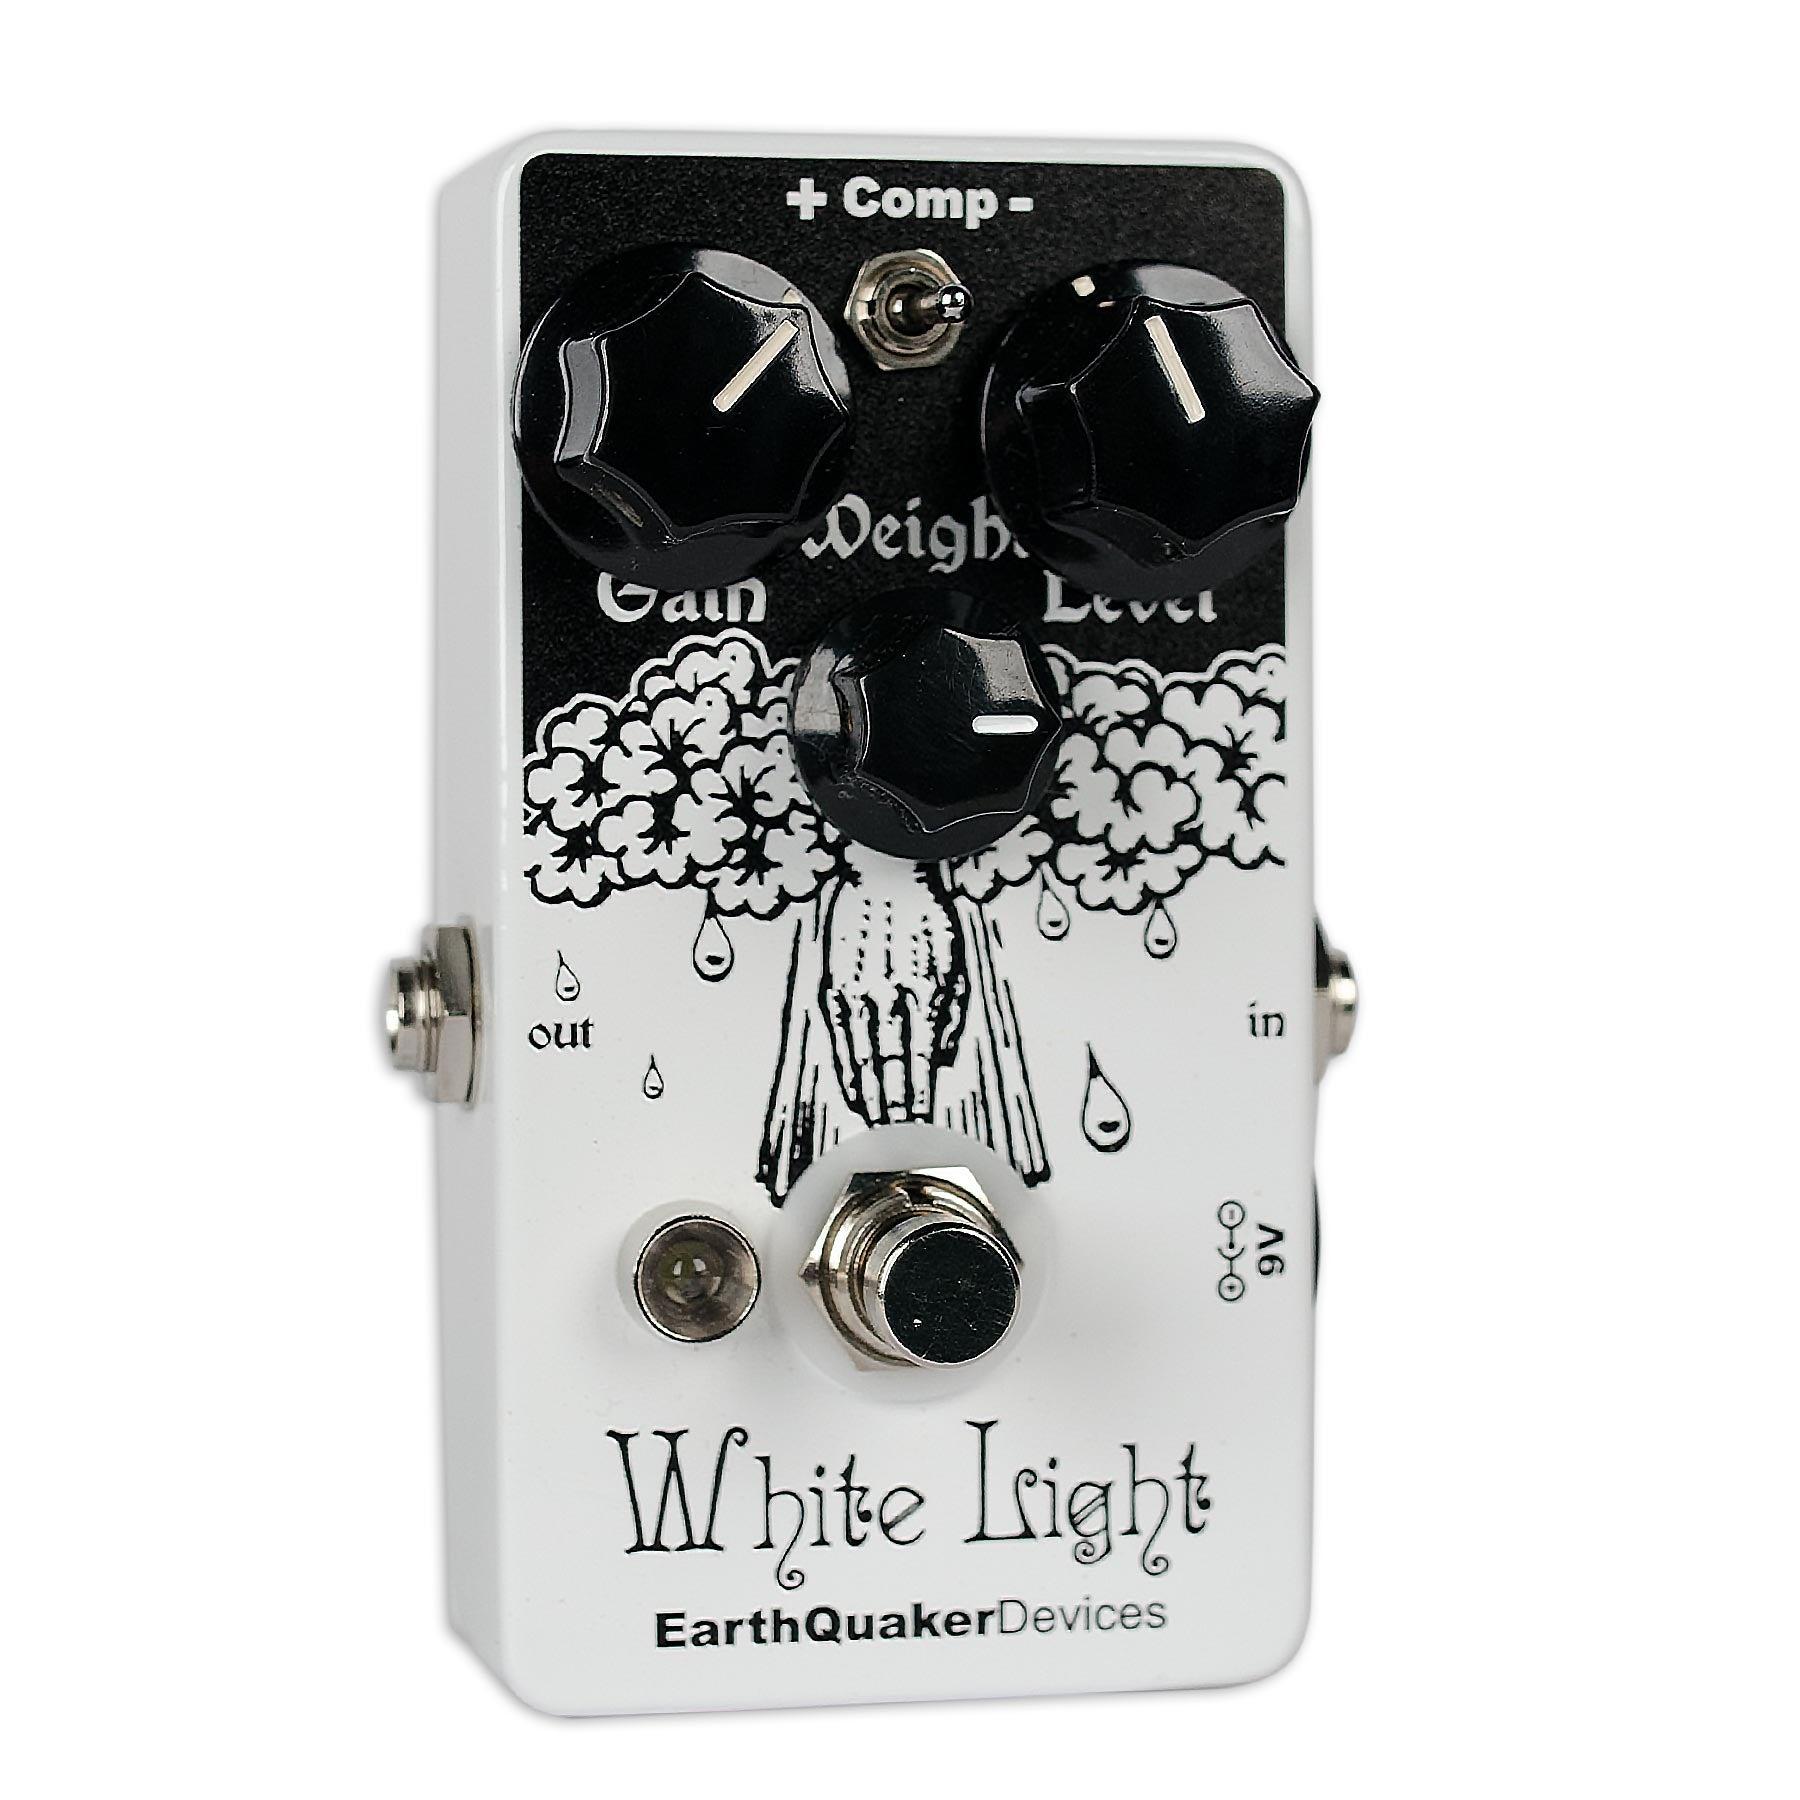 EARTHQUAKER DEVICES WHITE LIGHT OVERDRIVE